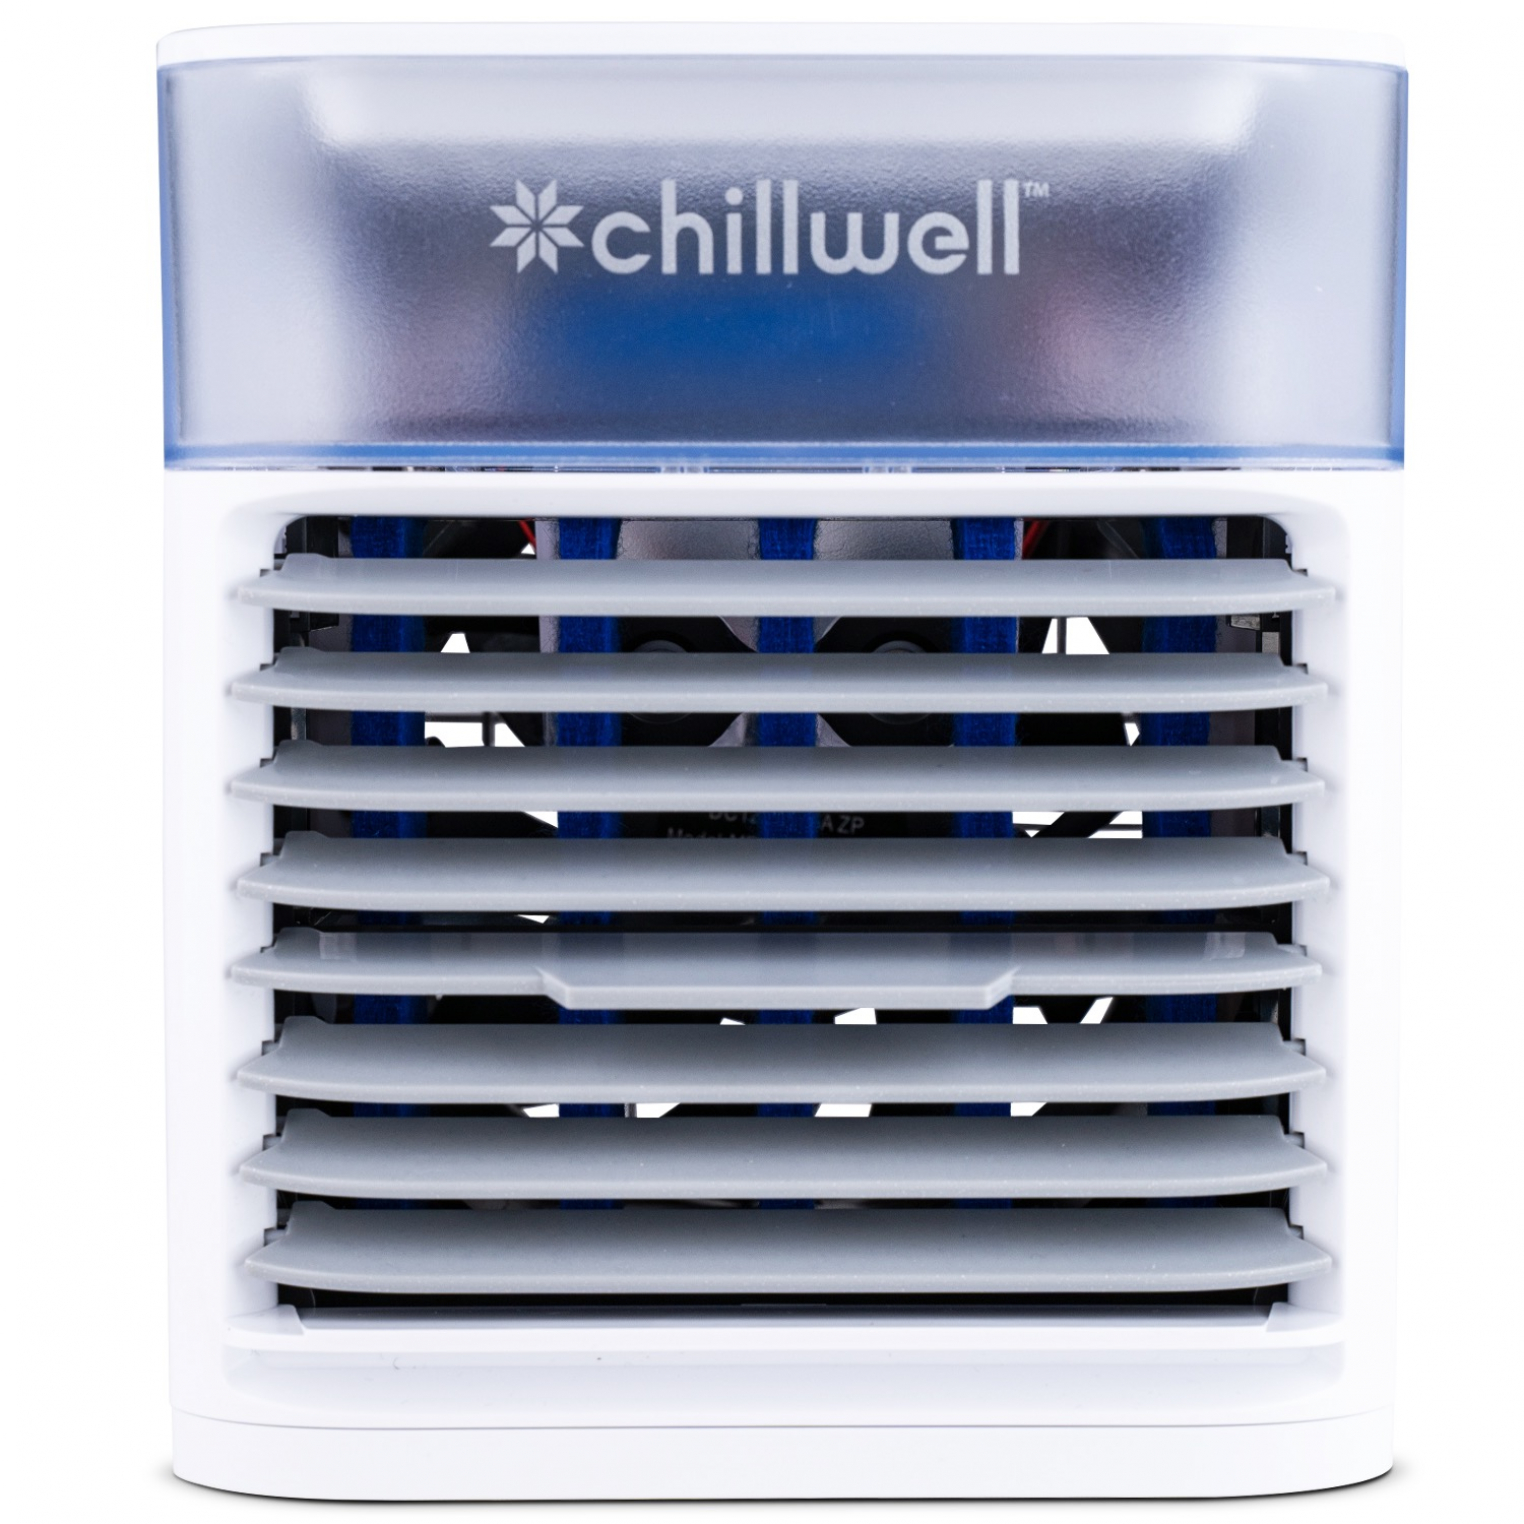 Chillwell AC Cooler Price